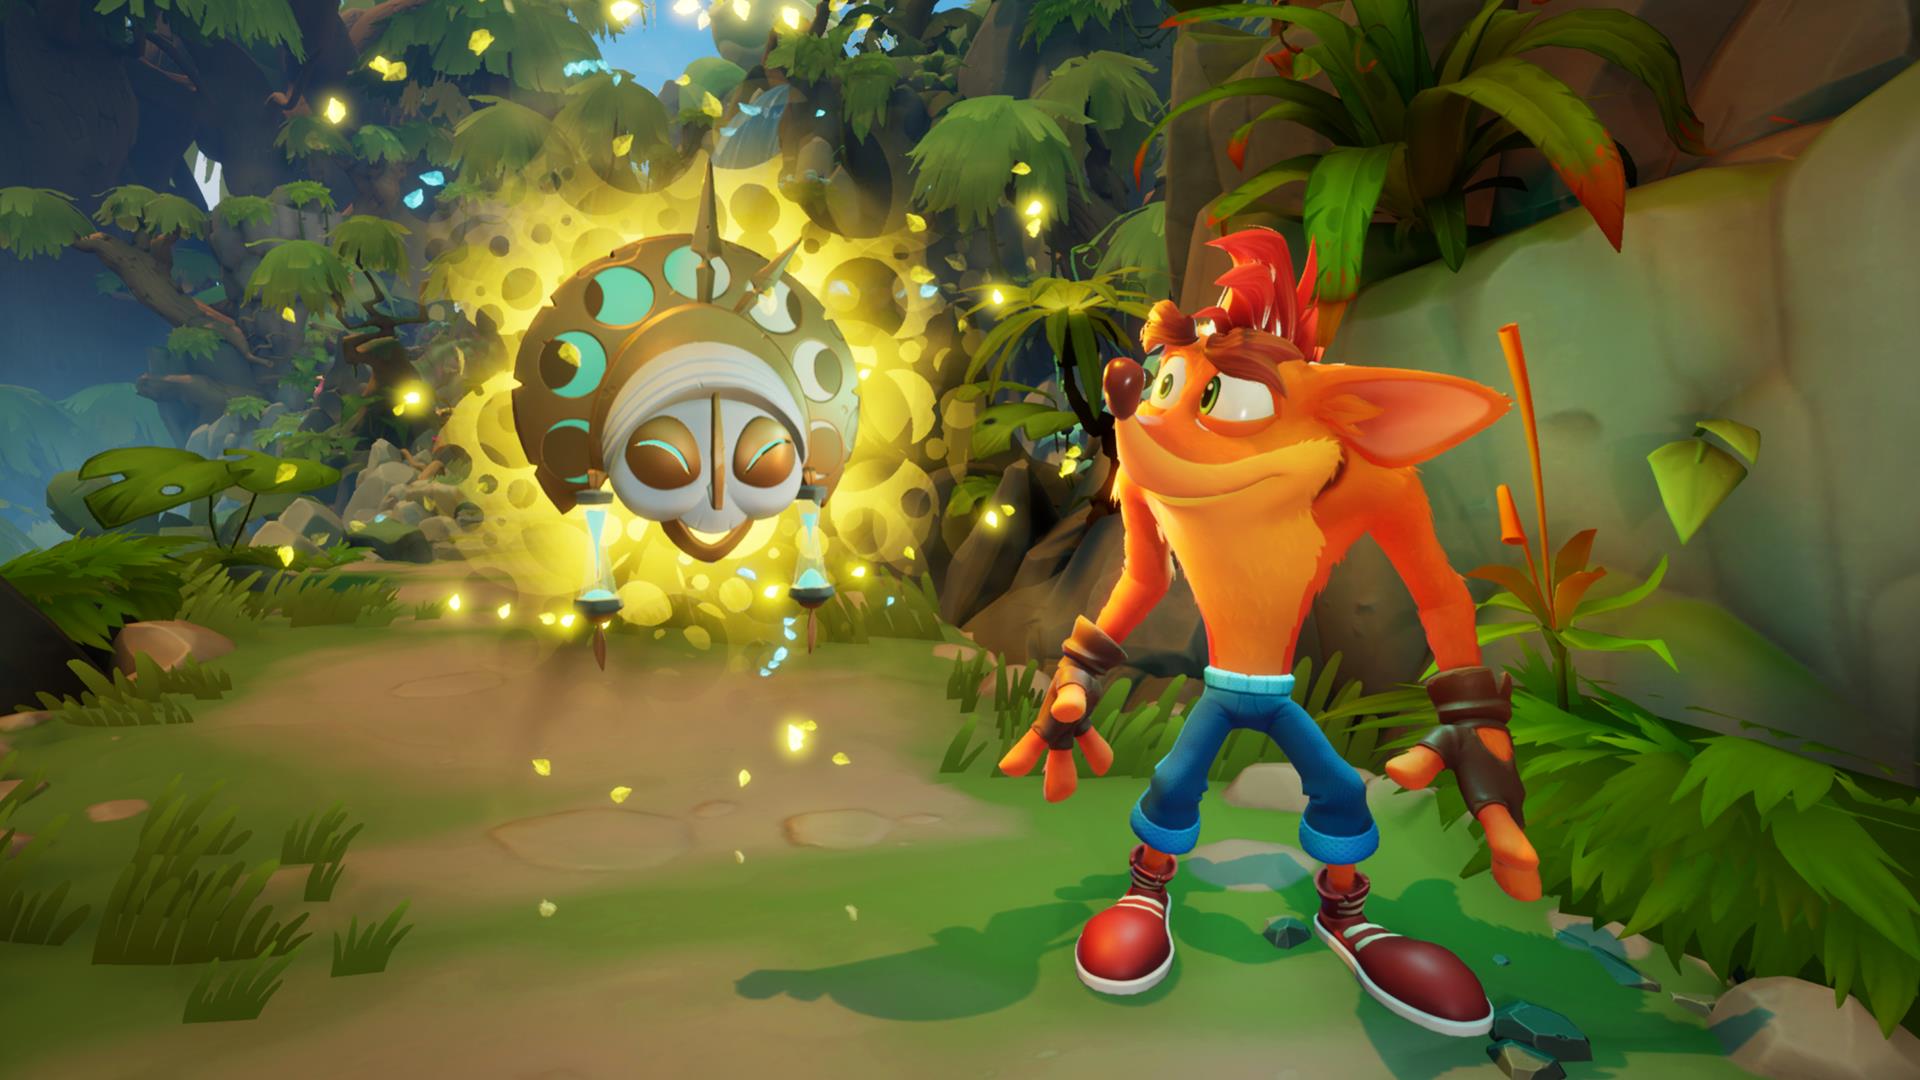 Image for Crash Bandicoot 4 will not feature microtransactions, according to developer [Update]